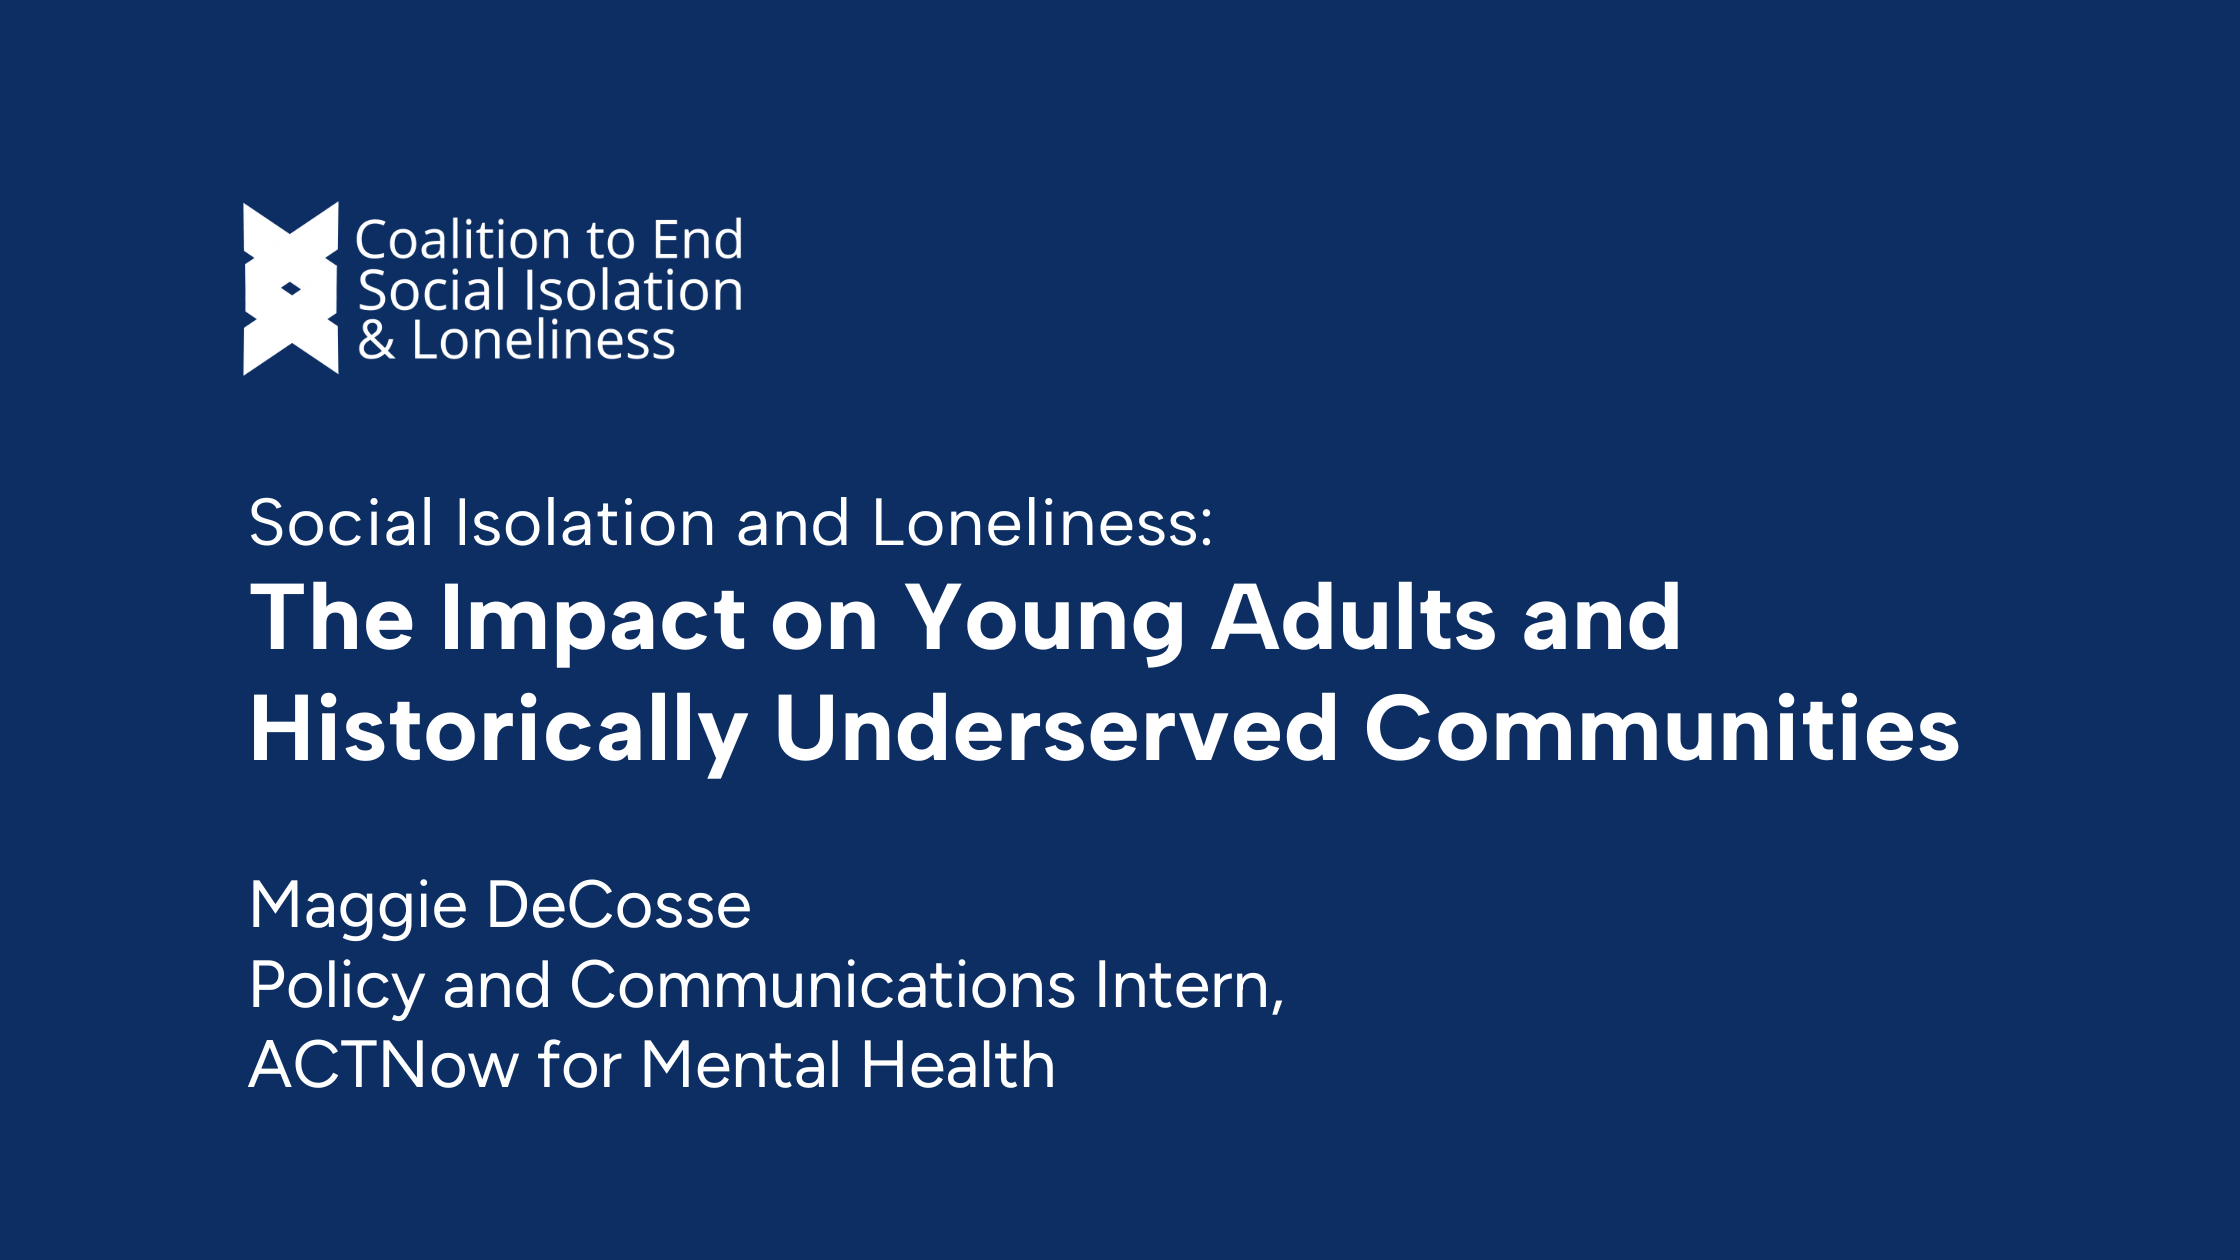 Social Isolation and Loneliness: The Impact on Young Adults and Historically Underserved Communities